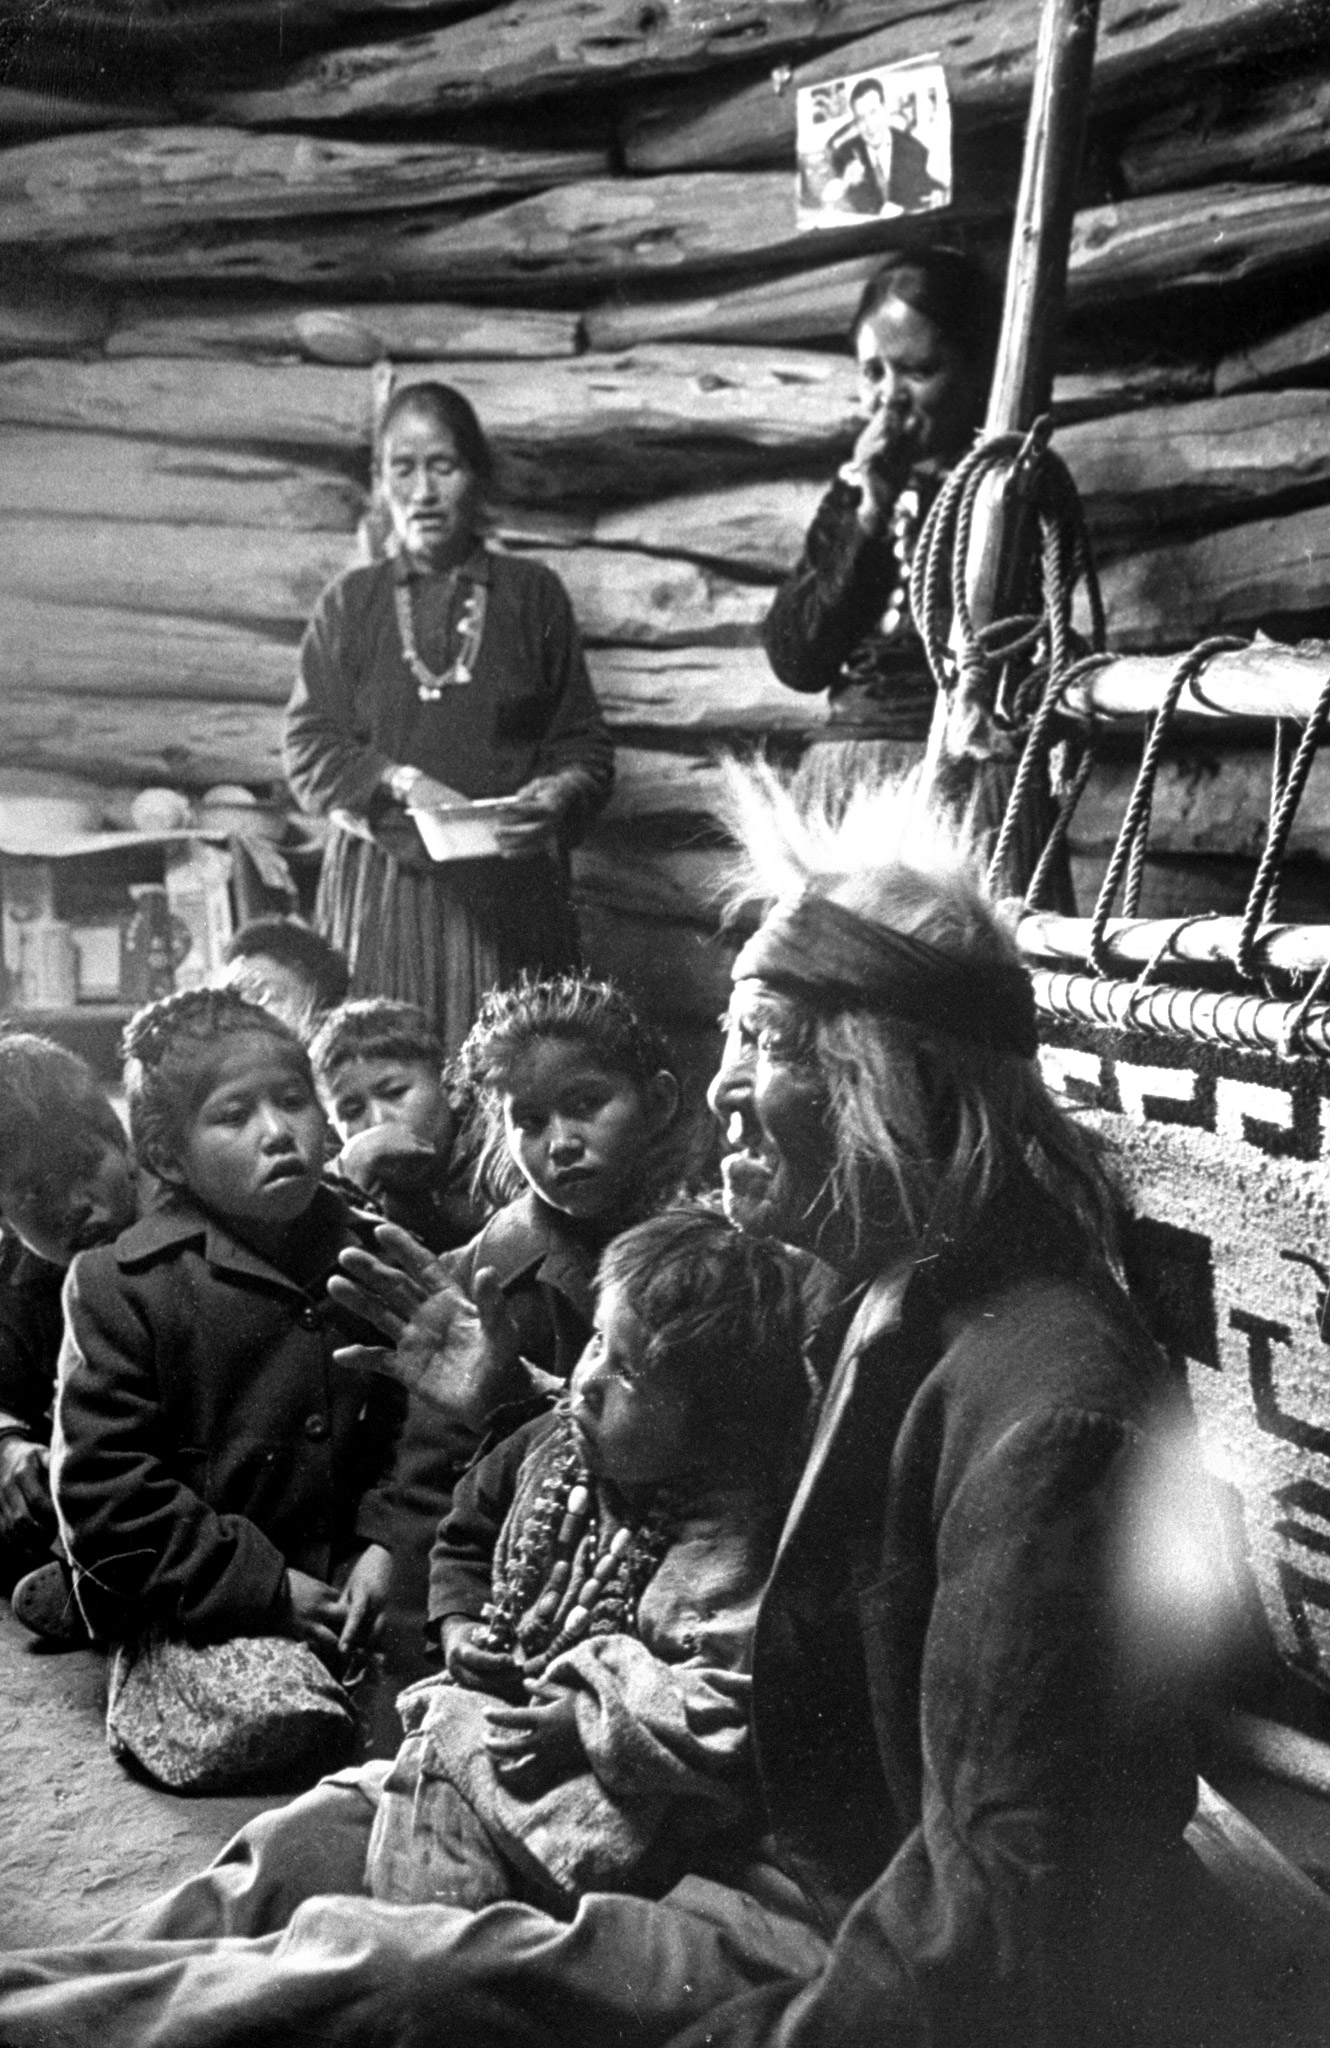 Seated close to the evening fire, old man Gray Mountain, 91, tells his small grandchildren legends about the early days of the Navajo people.